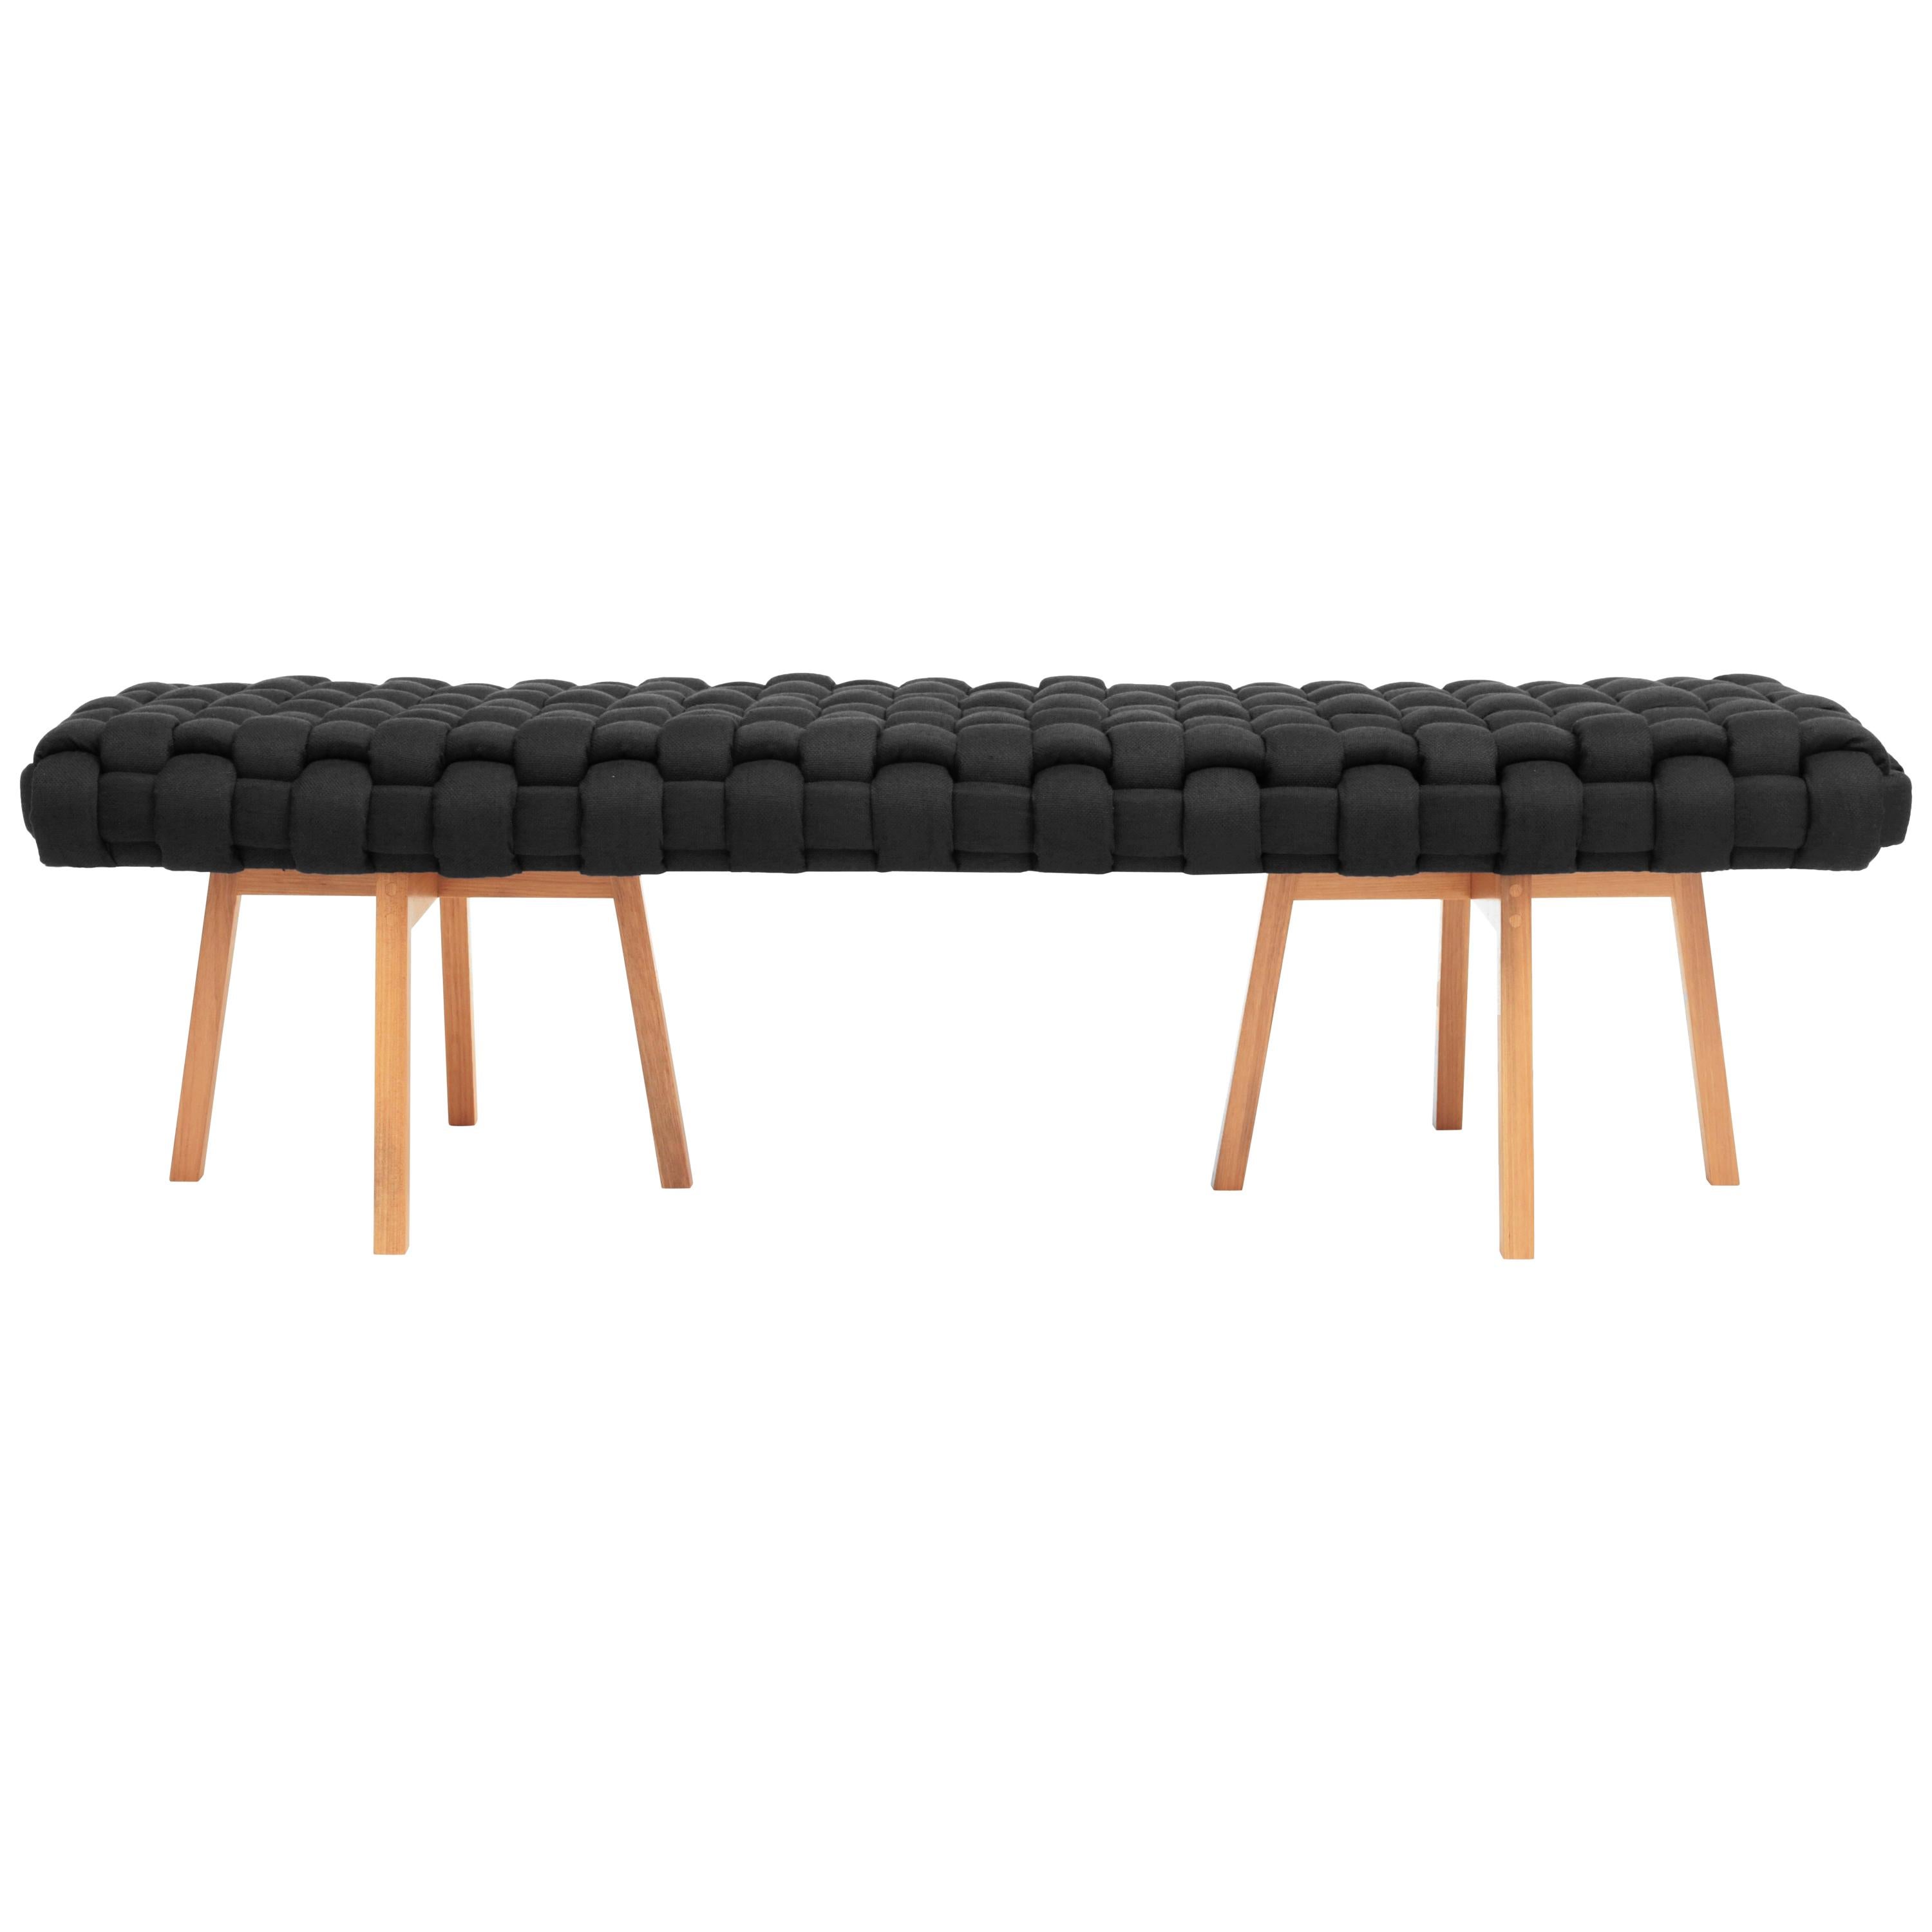 Contemporary Wood Bench, Handwoven Upholstery, the "Trama", Black For Sale